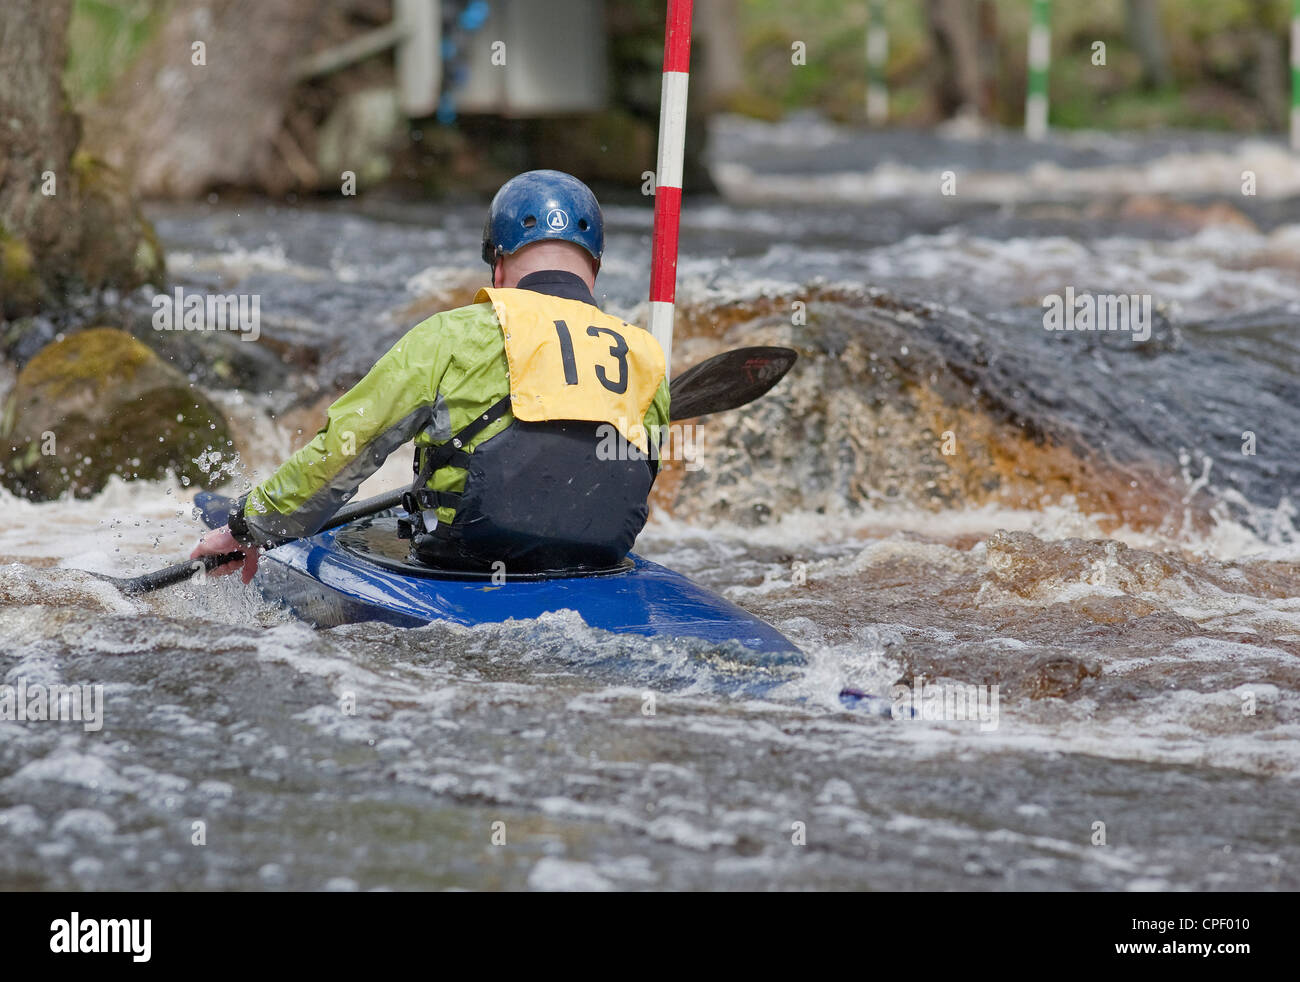 Male competitor in a slalom kayak competition, at the Washburn Valley, North Yorkshire April 2012 Stock Photo